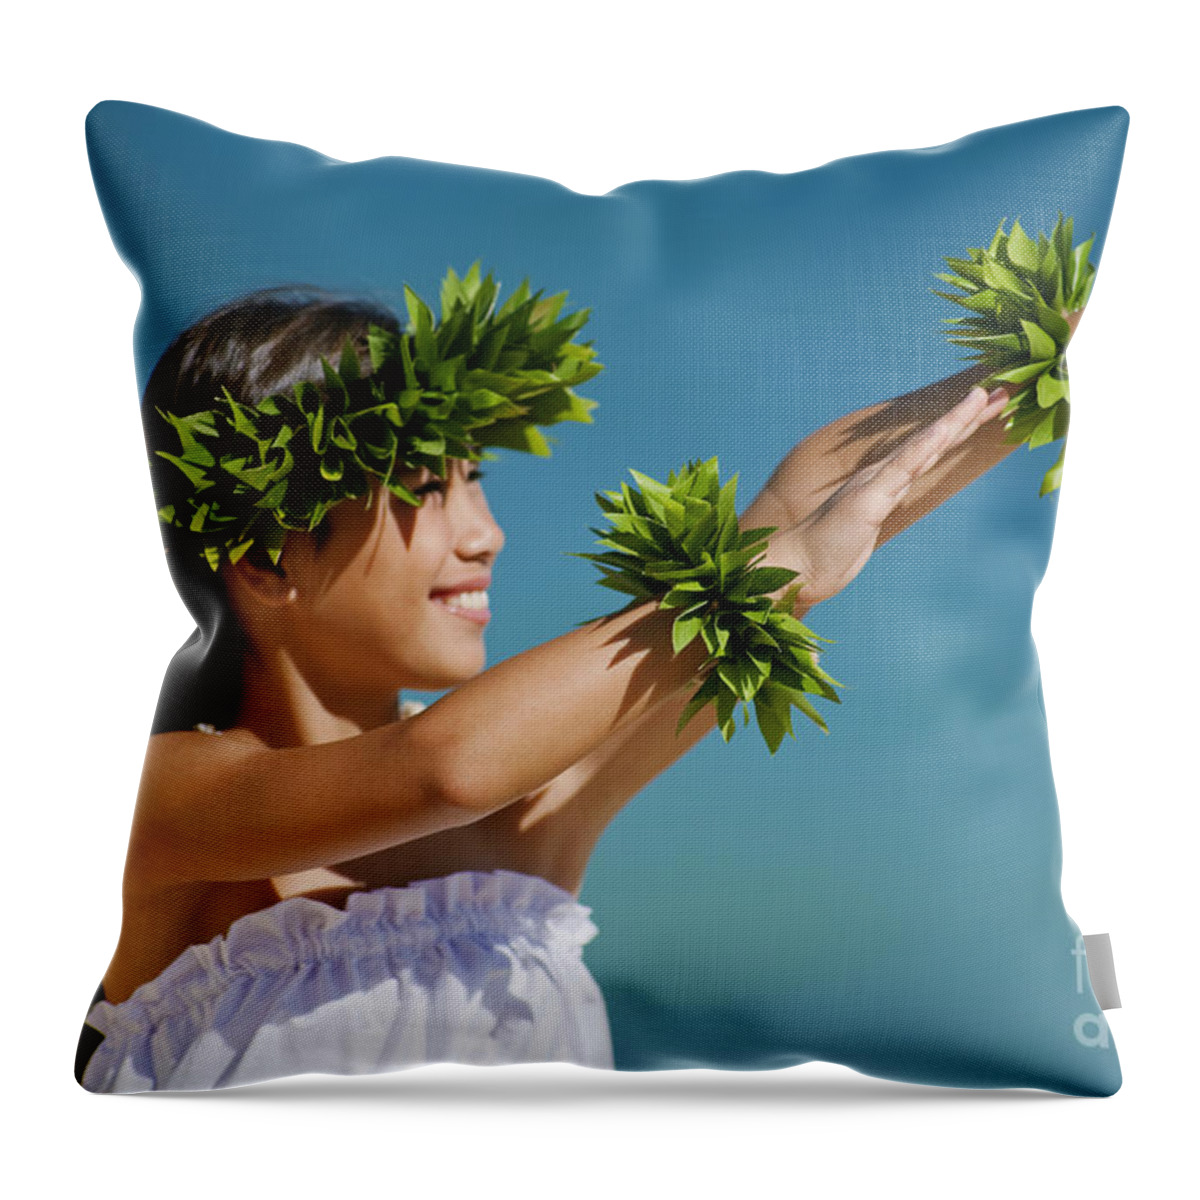 Aloha Throw Pillow featuring the photograph Keiki Hula by Ron Dahlquist - Printscapes